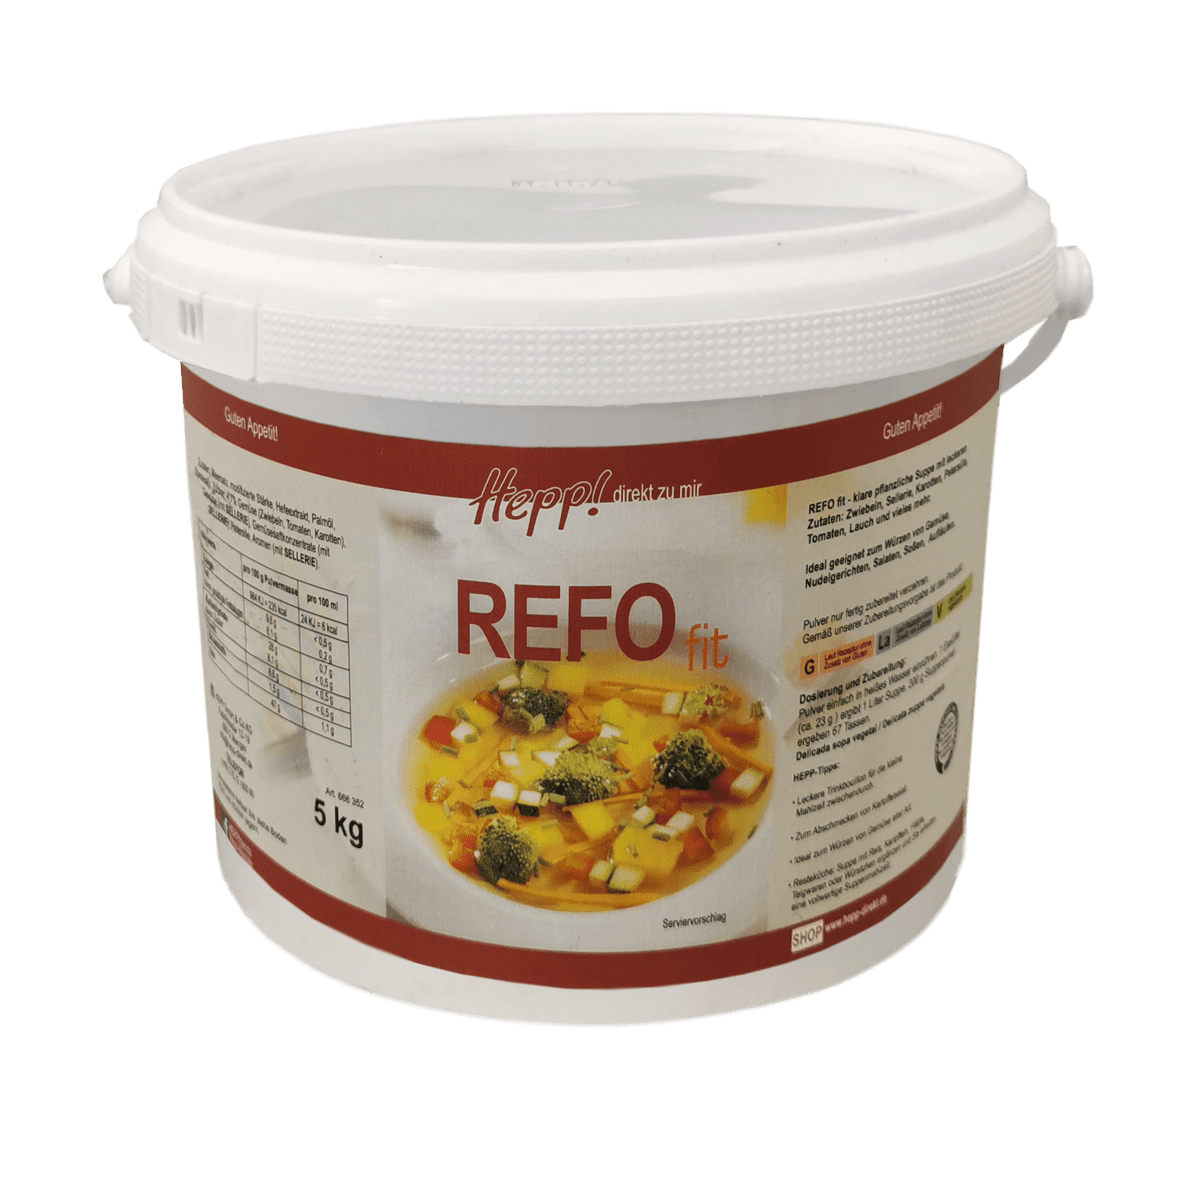 Refo fit Suppe